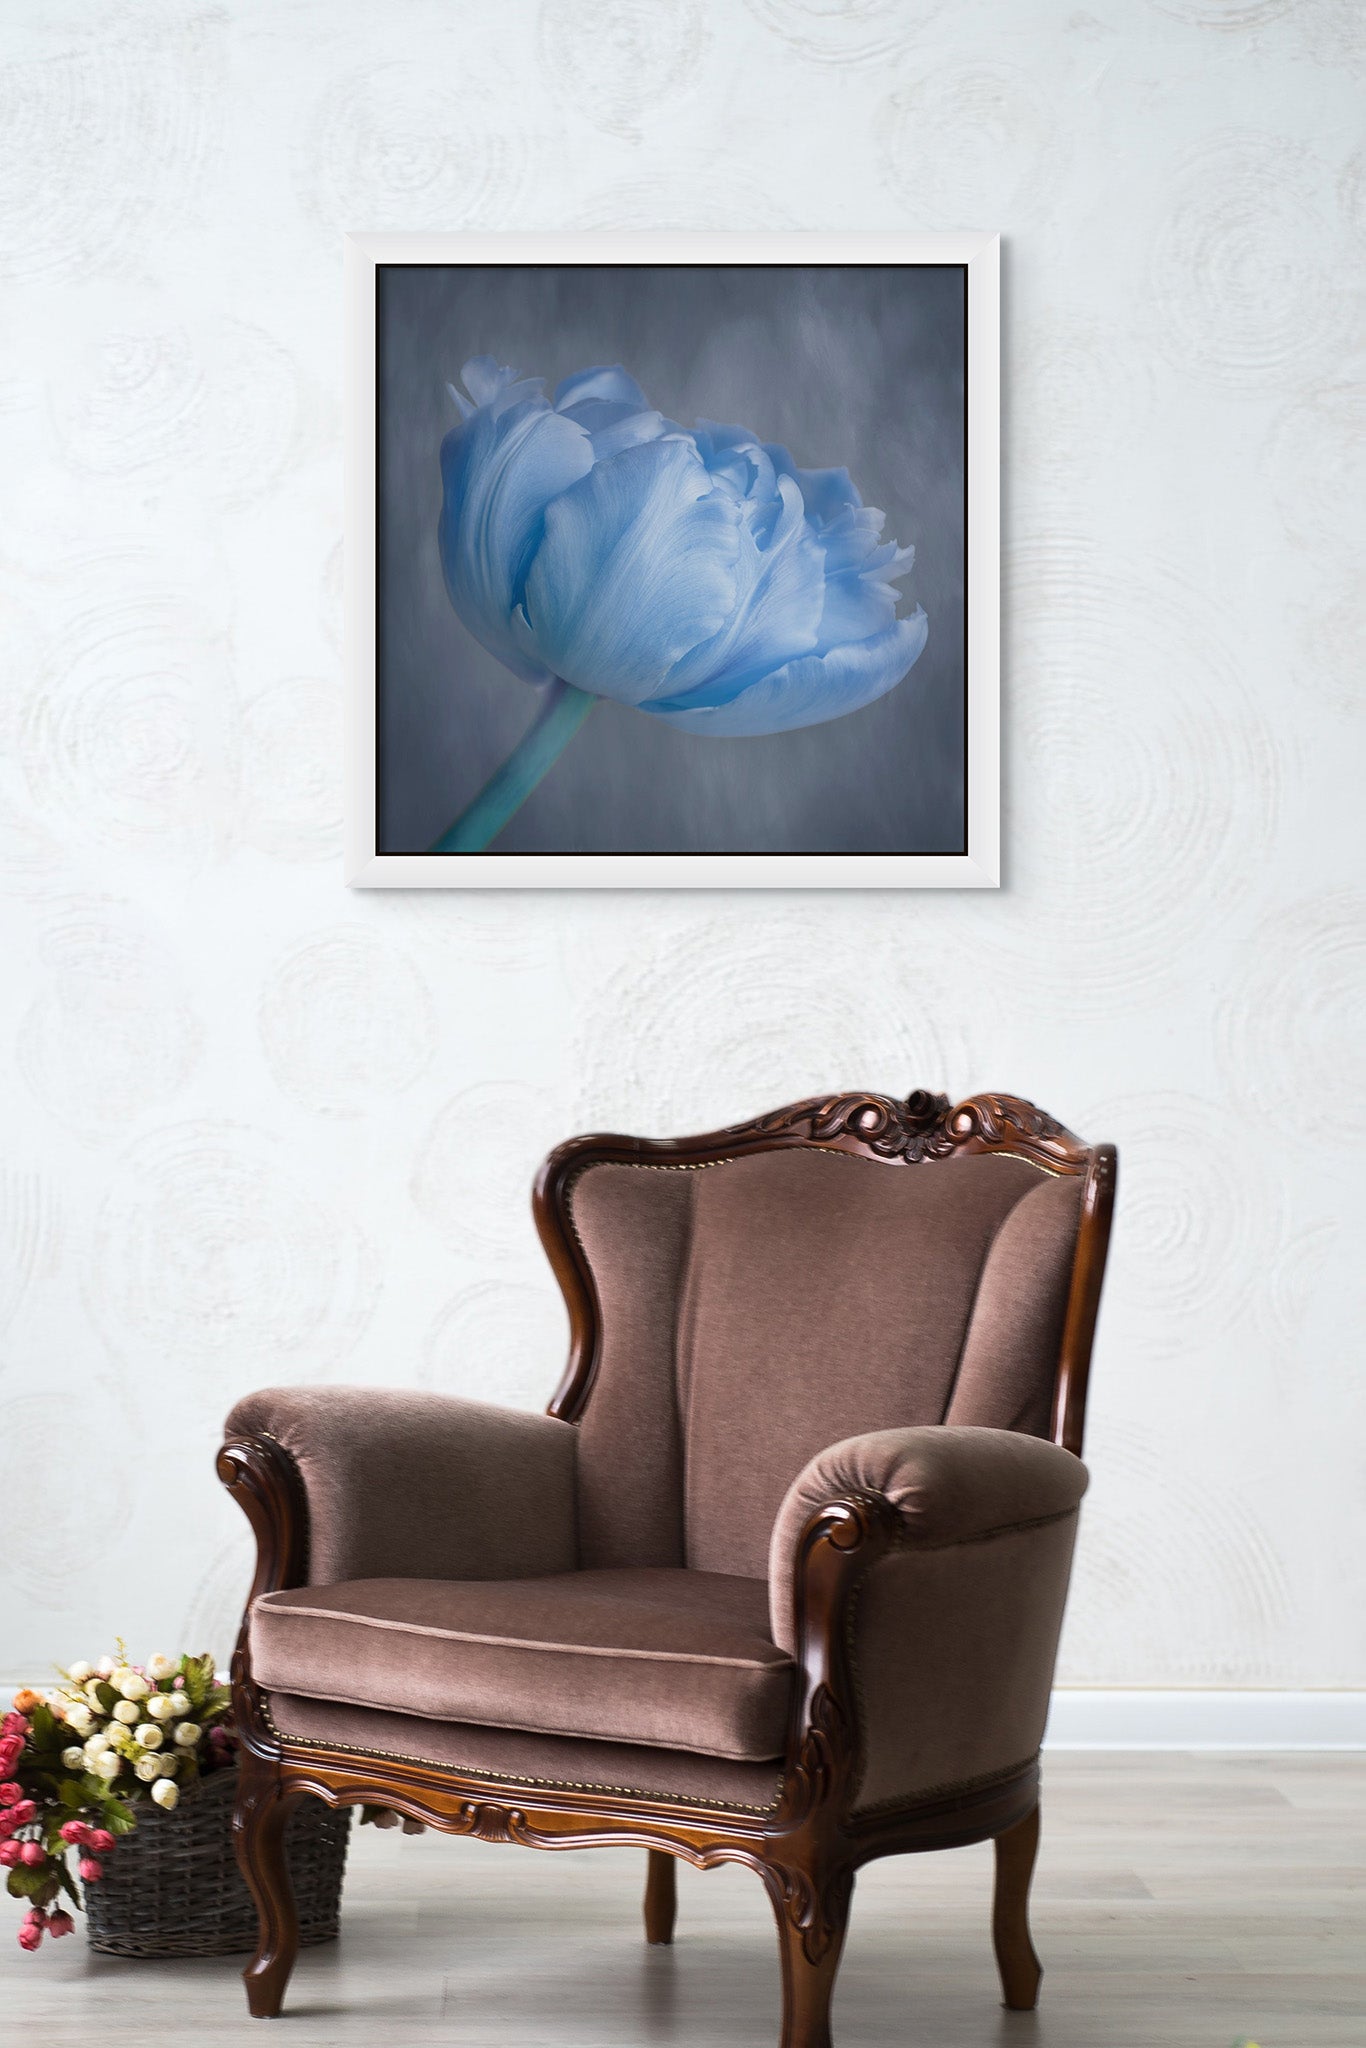 Picture hanging on the wall of a room. The room has a chair in the middle of the room. The picture is a fine art photograph of a blue tulip by Cameron Dreaux. 